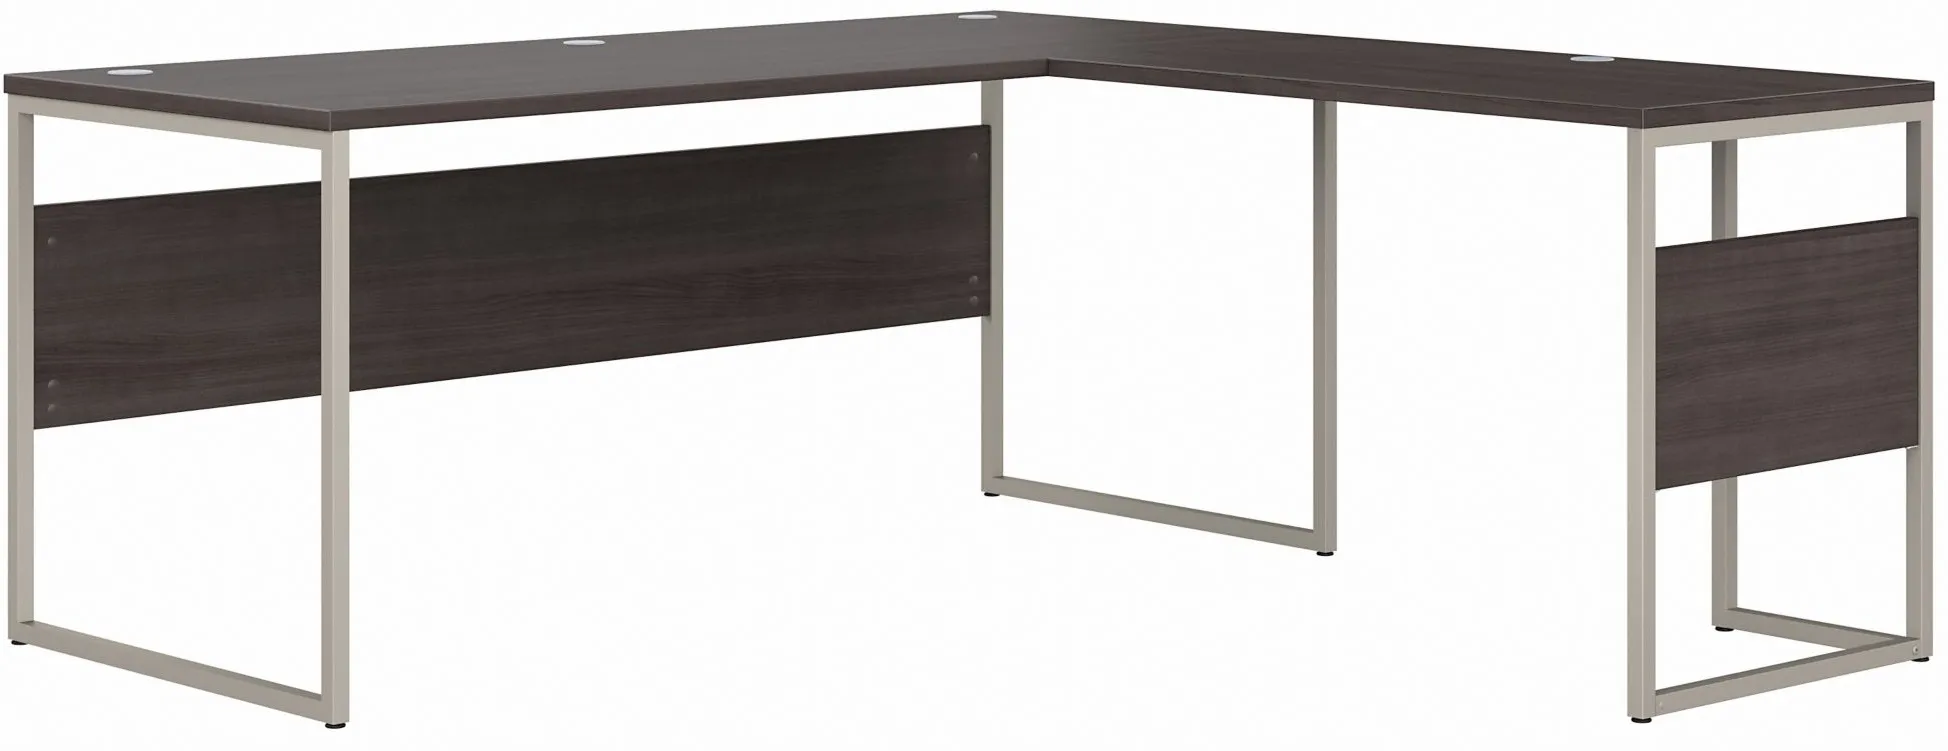 Steinbeck L-Shaped Computer Desk in Storm Gray by Bush Industries